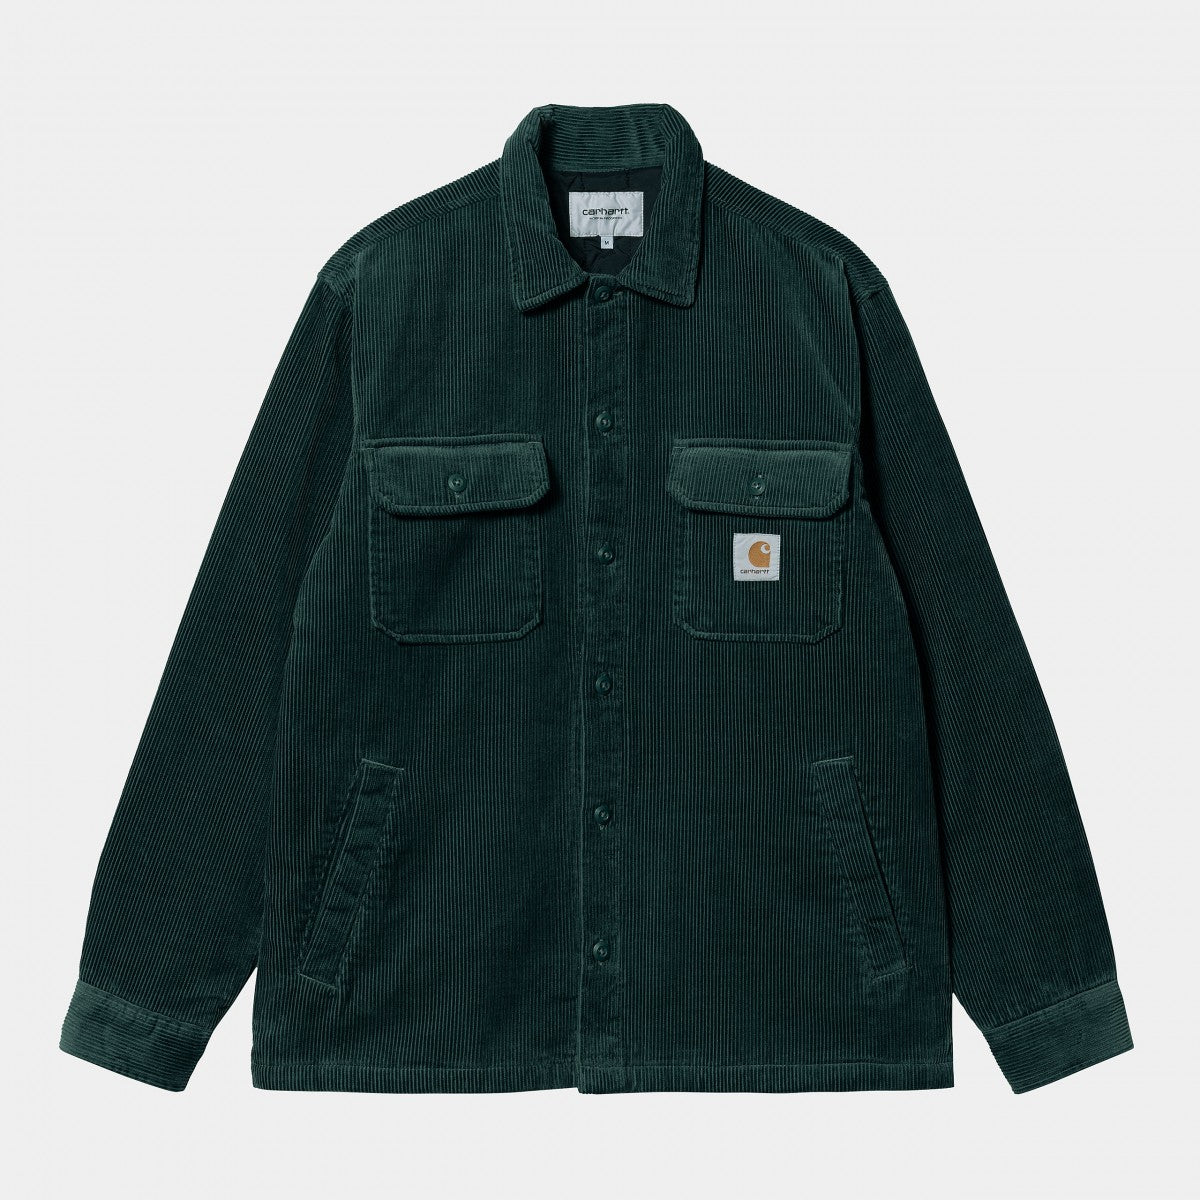 Carhartt || Whitsome Shirt Jacket || Discovery Green